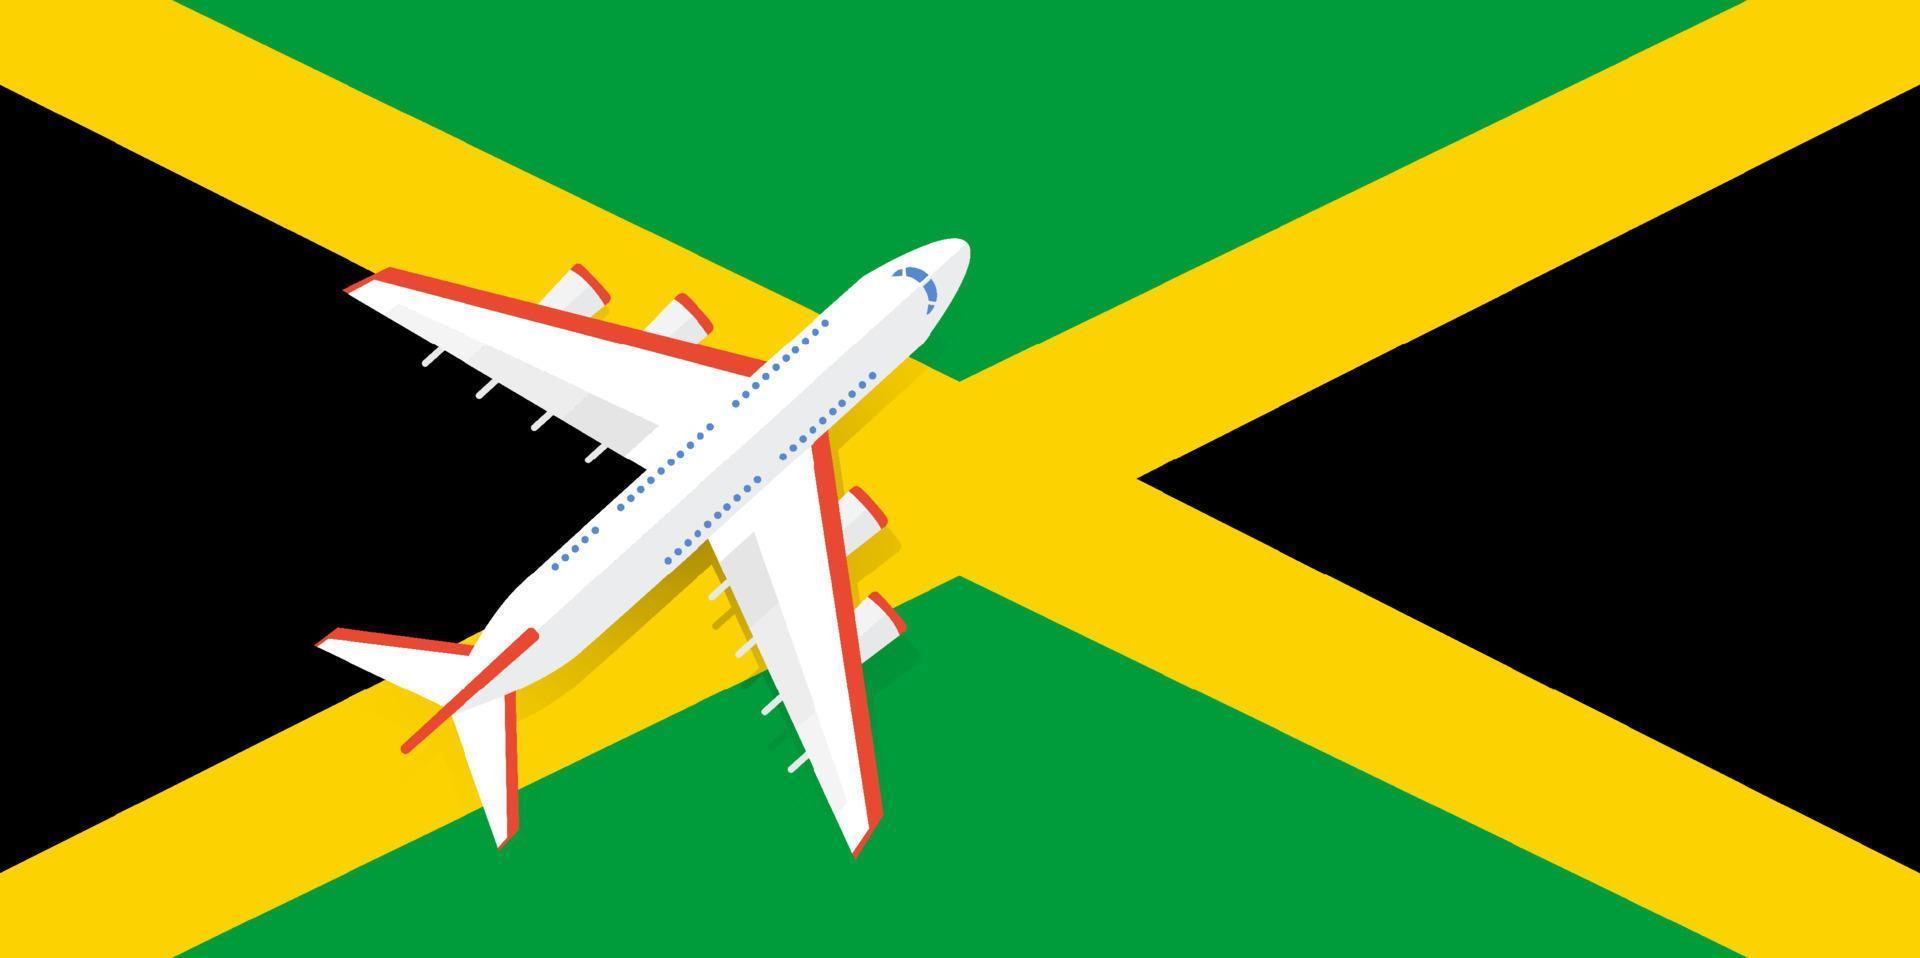 Vector Illustration of a passenger plane flying over the flag of Jamaica. Concept of tourism and travel